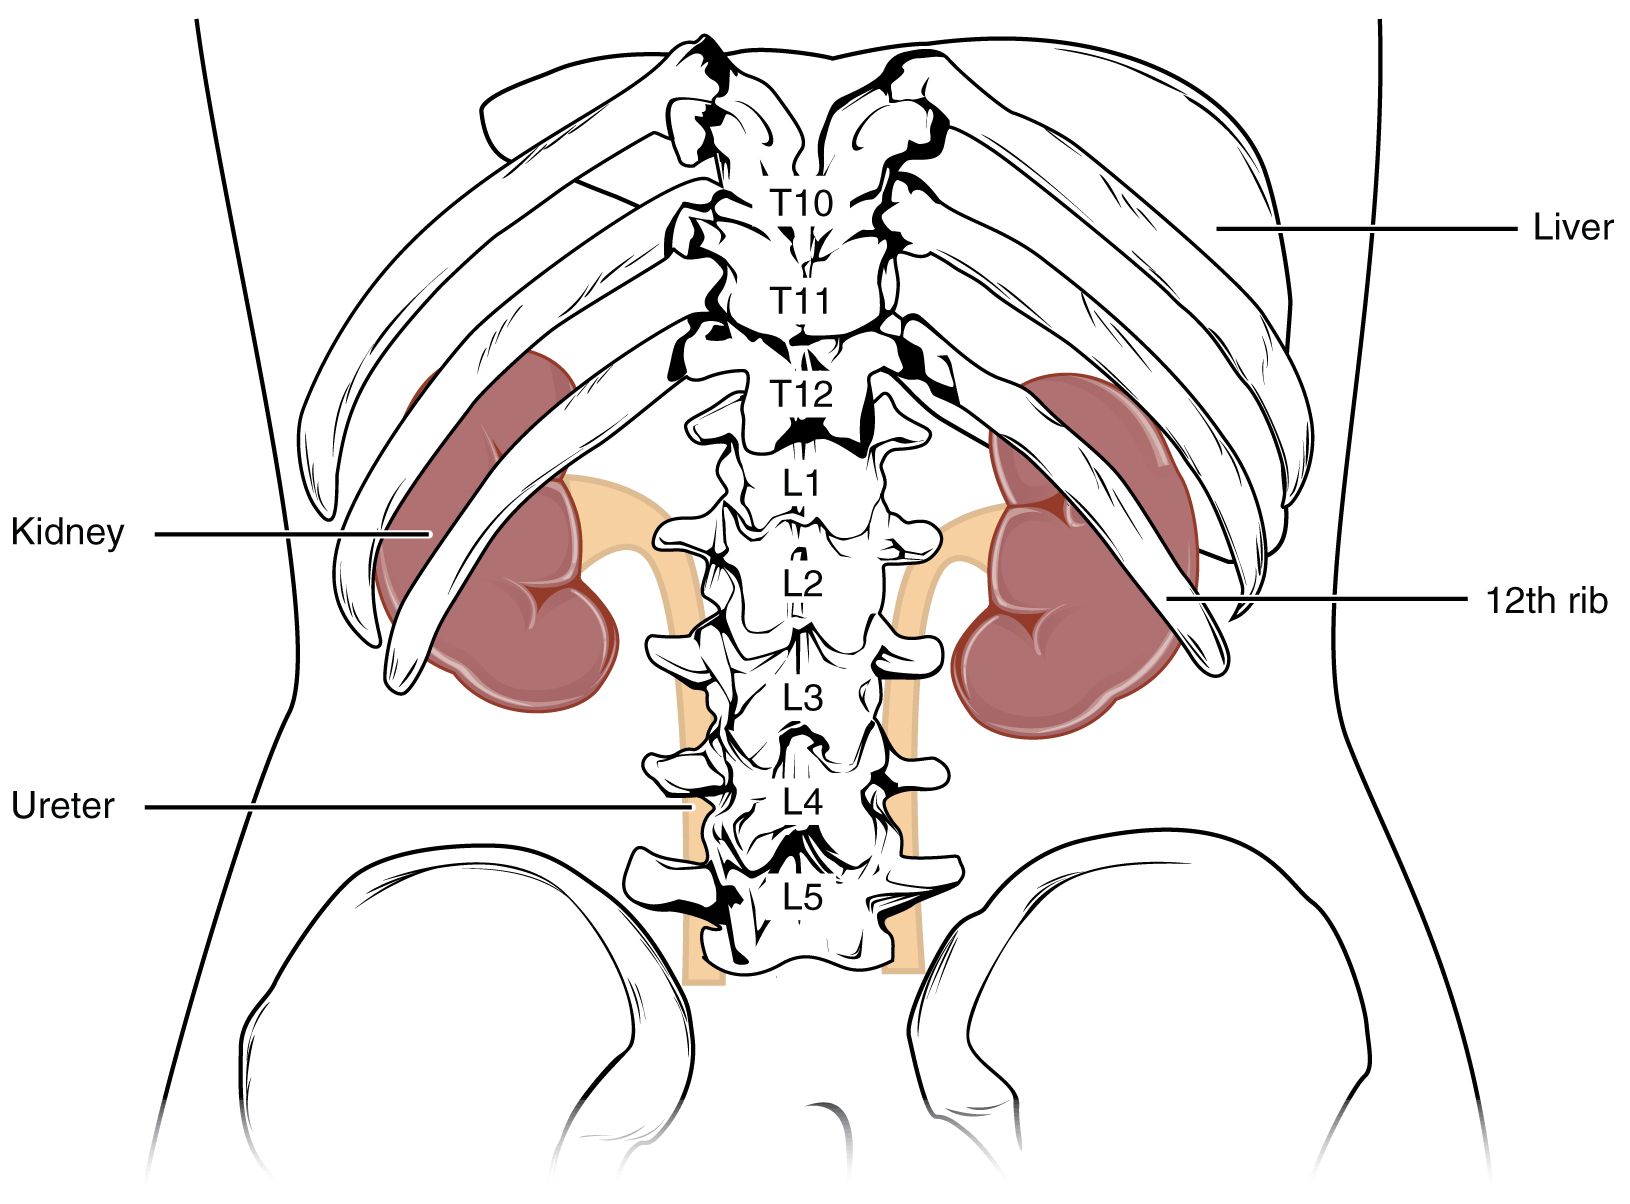 Drawing of posterior view of kidneys and ureters deep to spinal column and ribs.